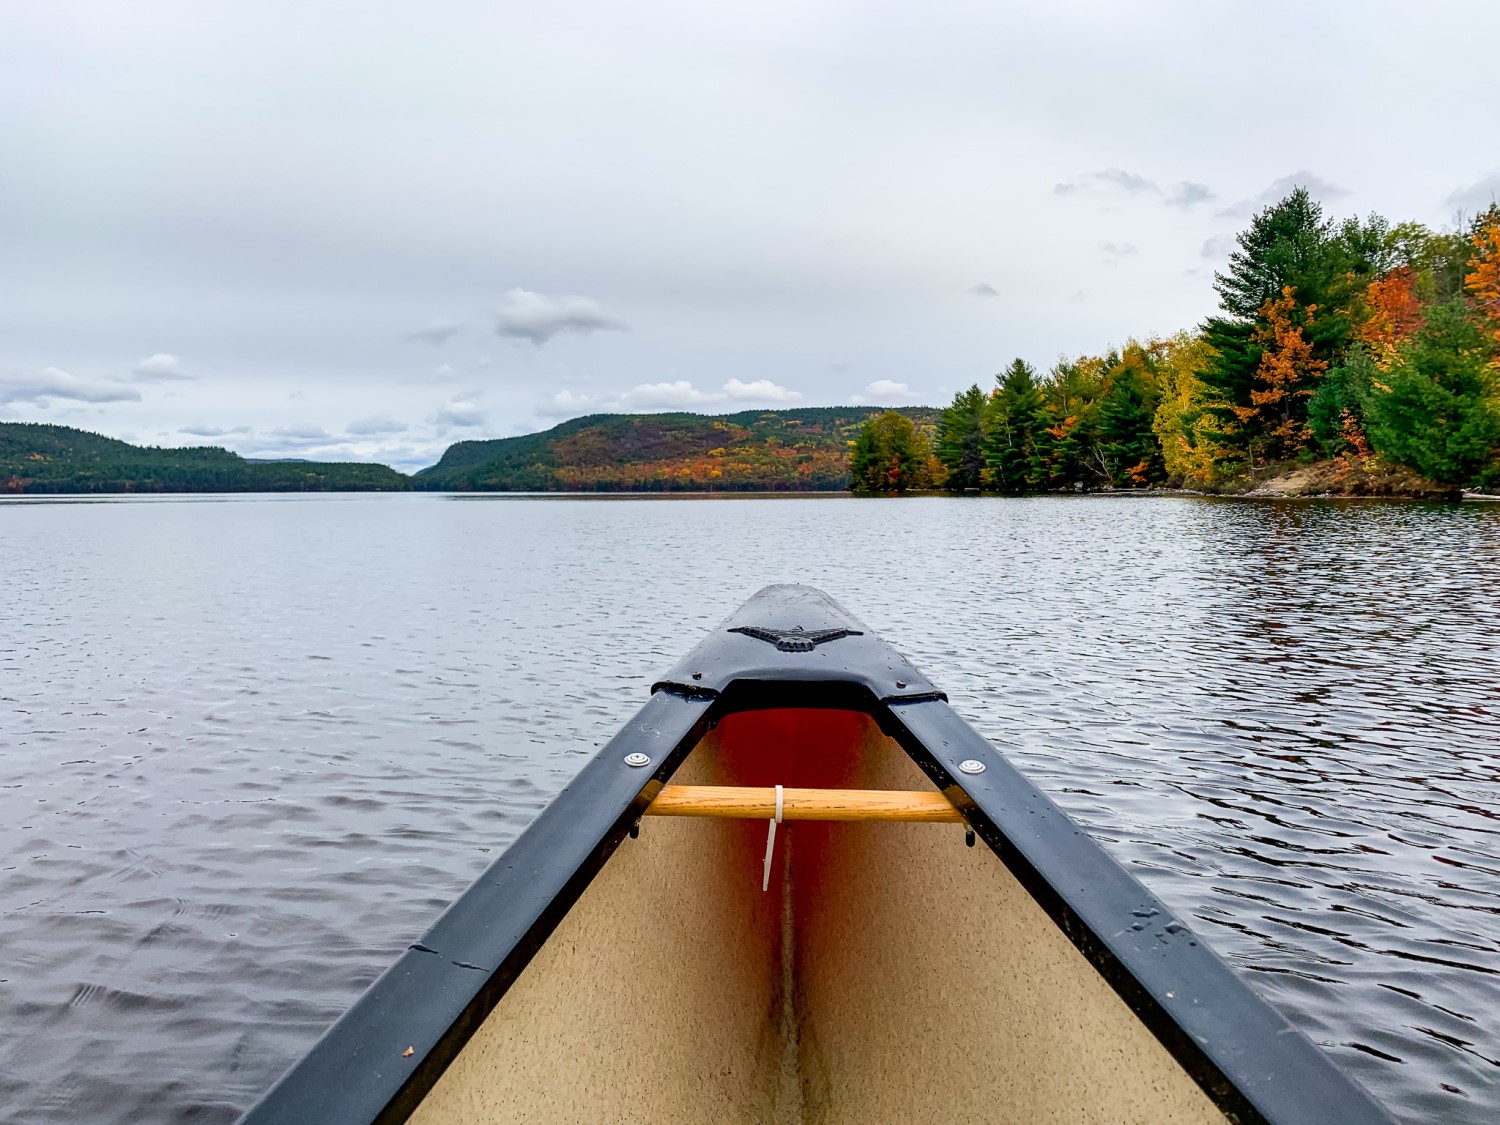 The front of a canoe in a river pointing towards a multicolour treeline in the distance.